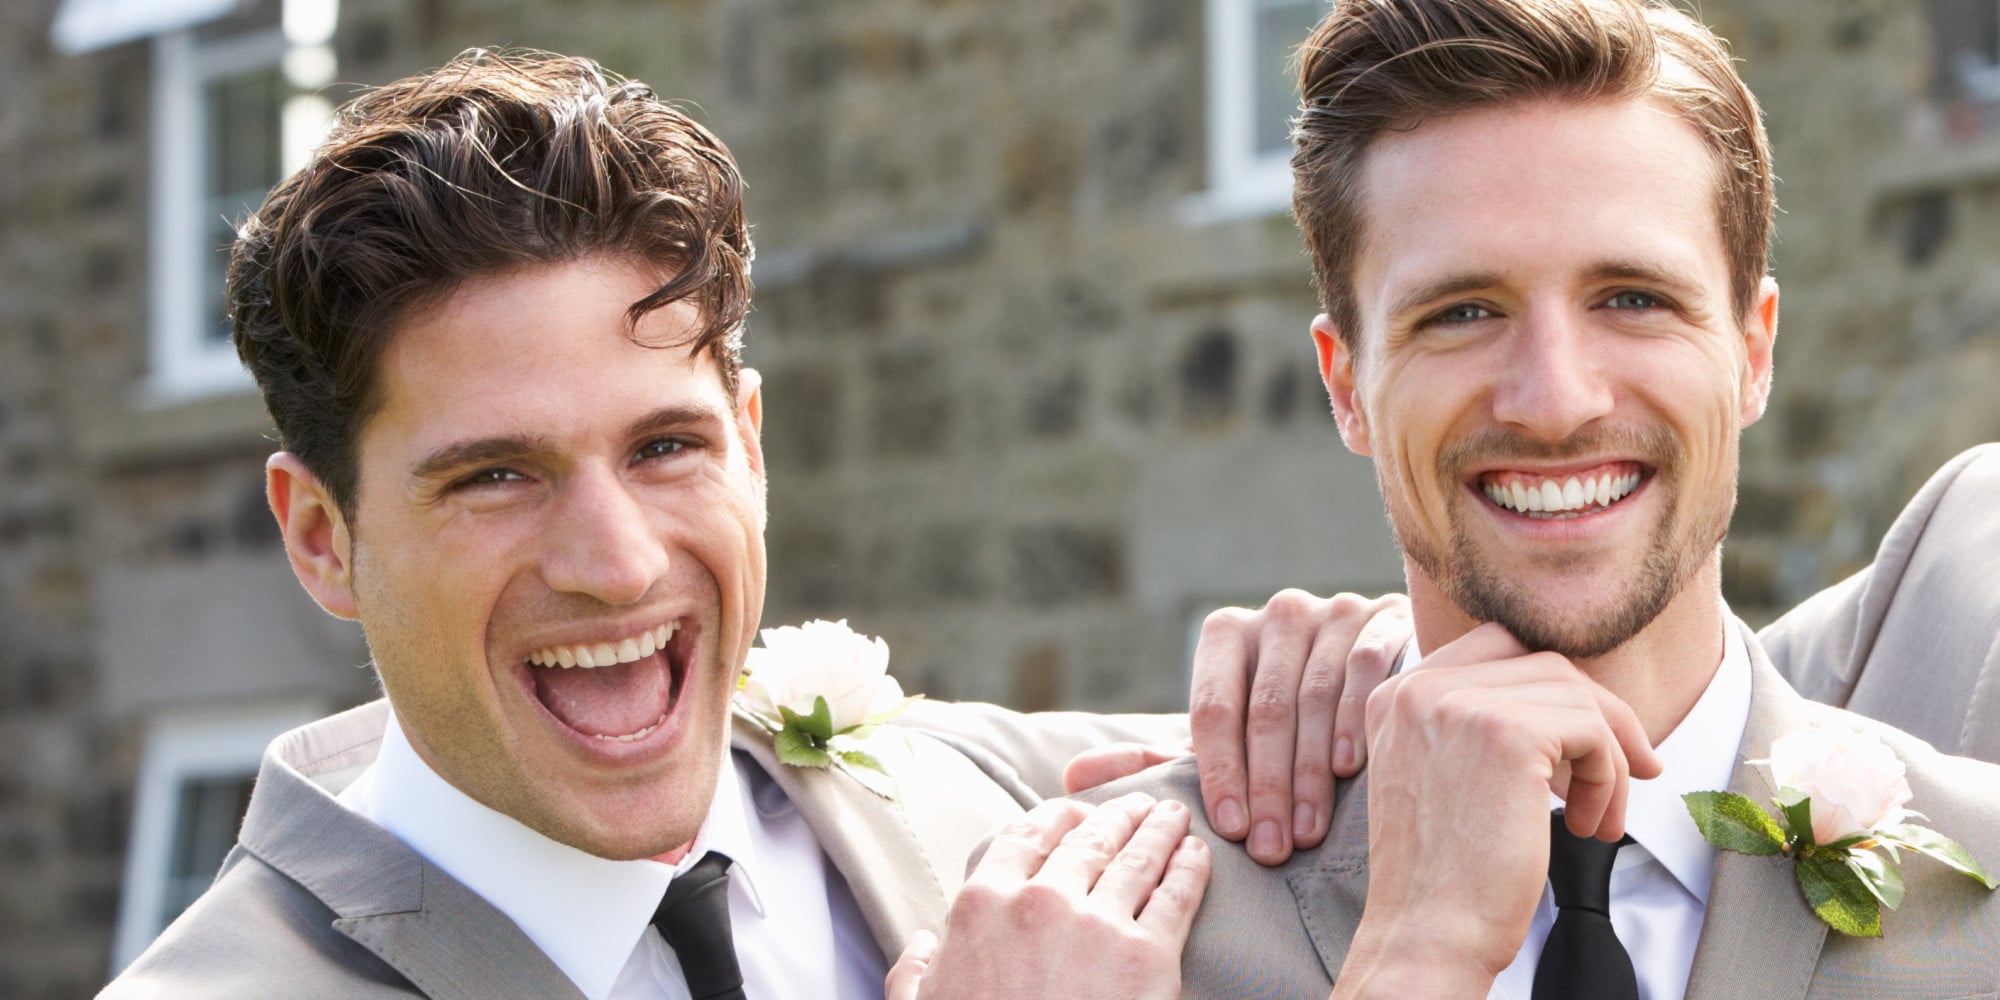 Psychotherapist Compares Differences Between Gay And Straight Couples